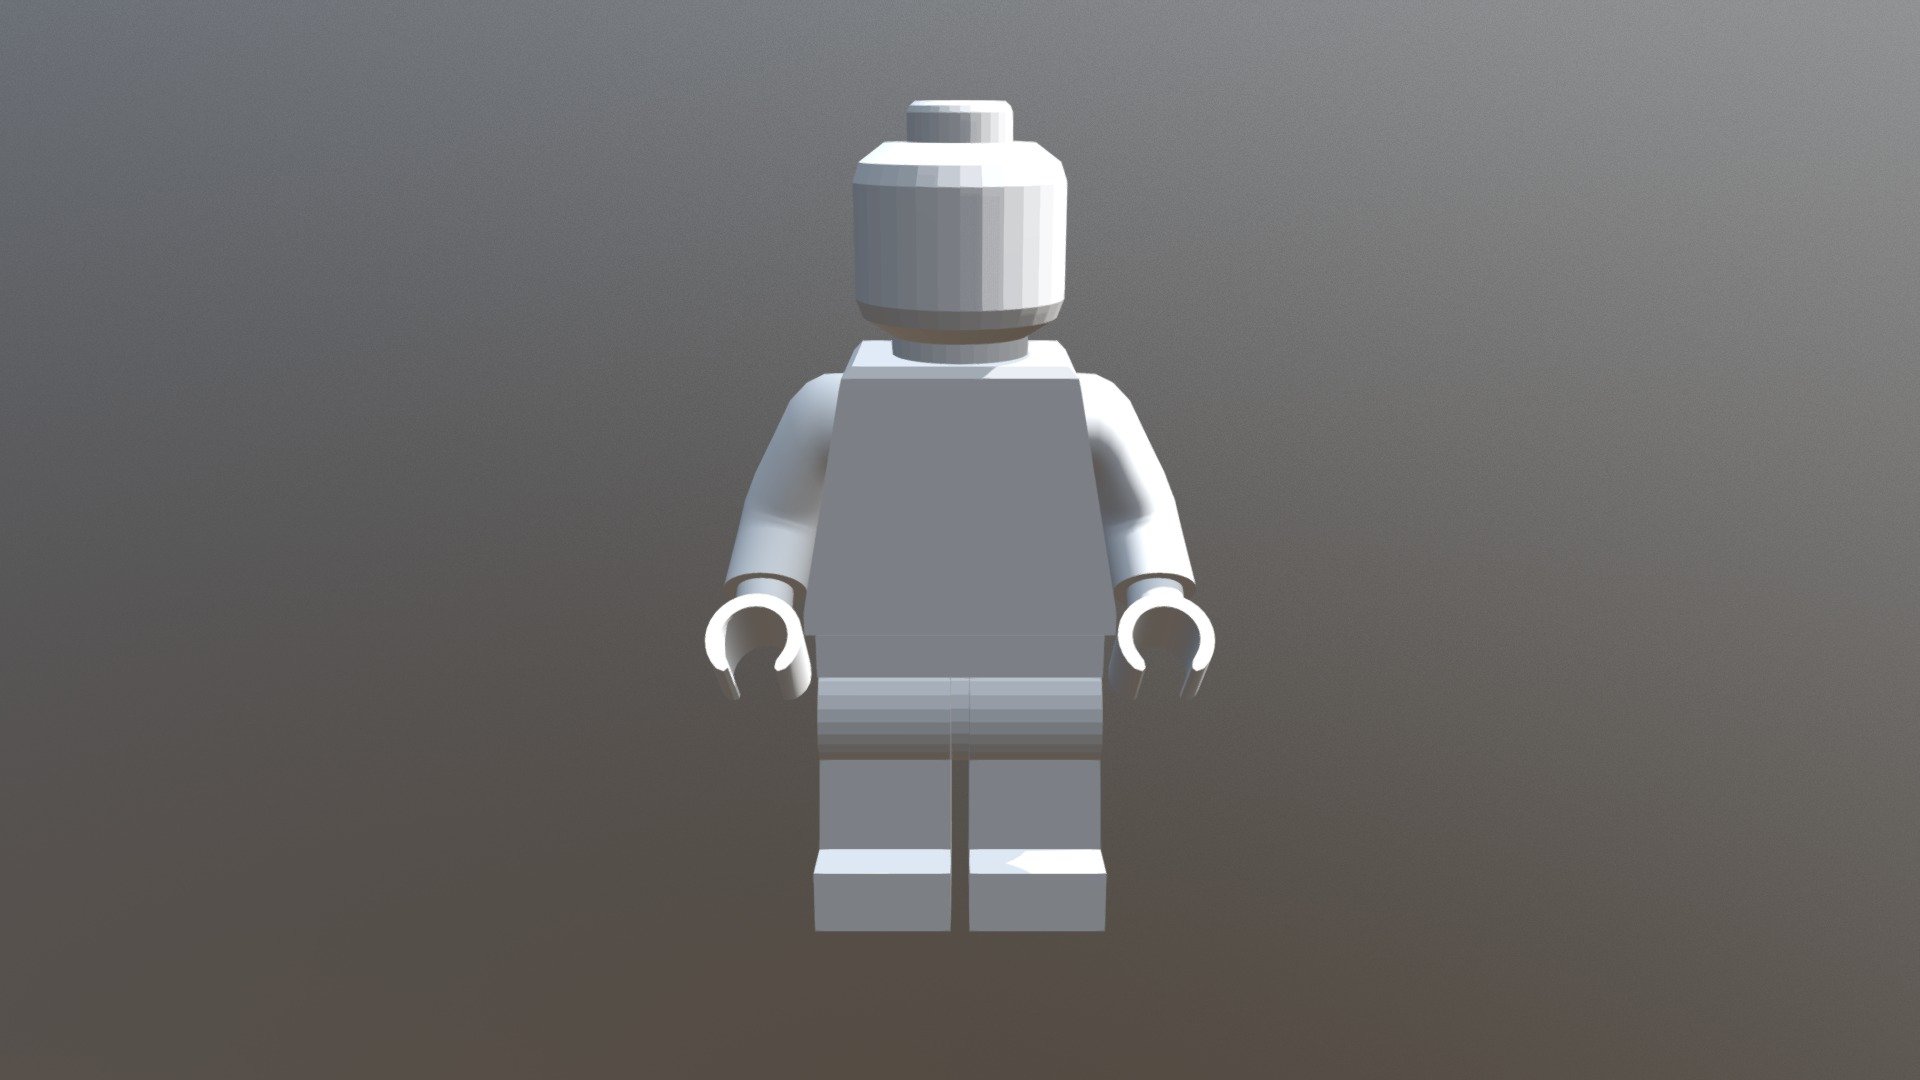 Lego Minifigure - 3D model by Rob Meade (@RobMeade) [3bf86ed]